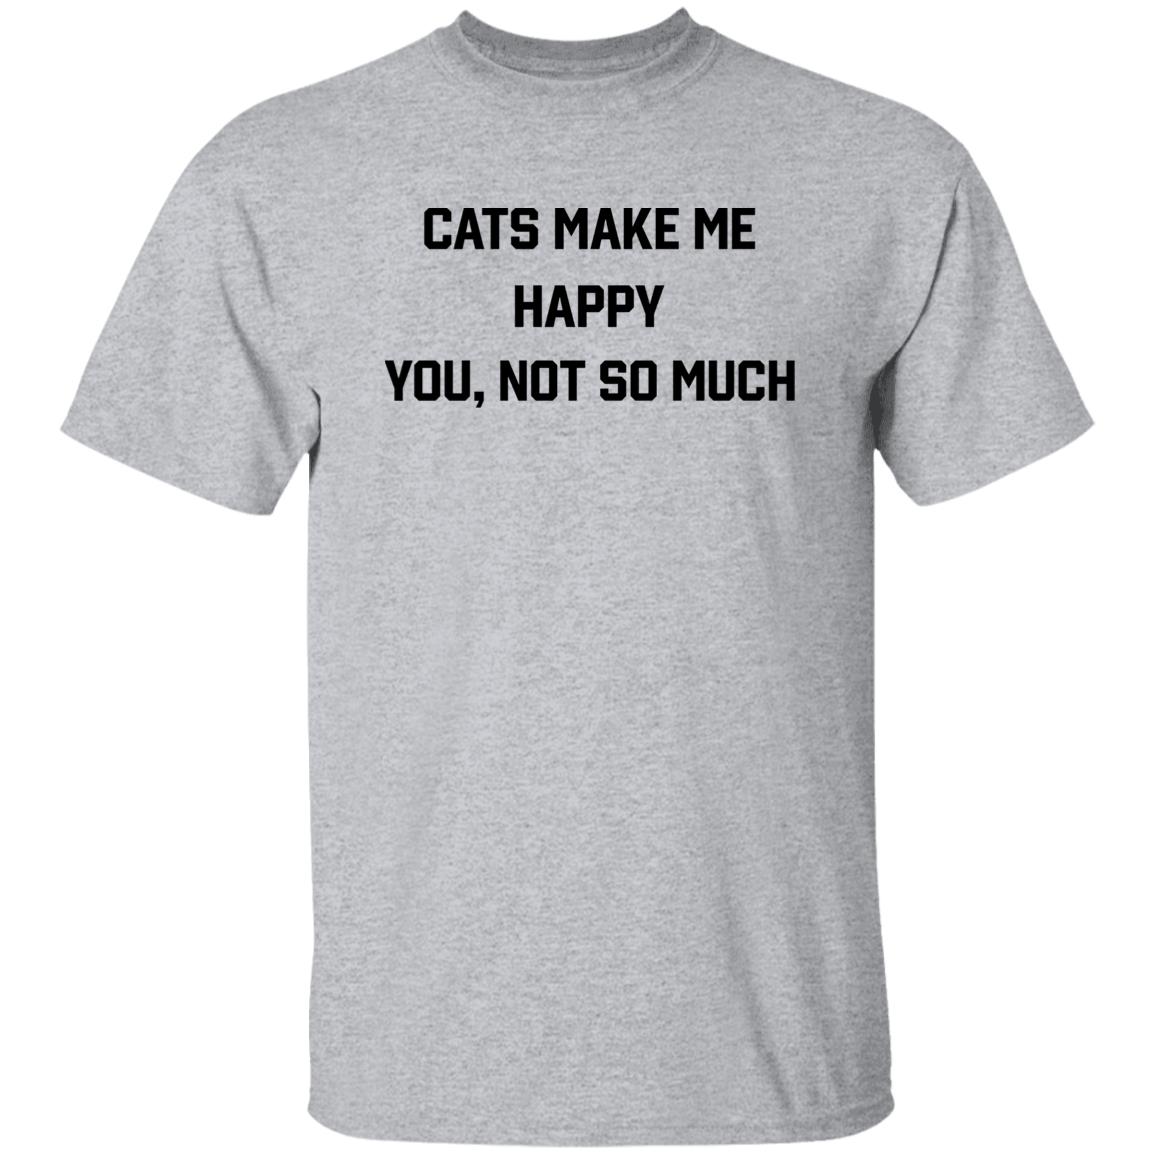 Anne Twist Wearing Cats Make Me Happy You Not So Much Shirt Candy147